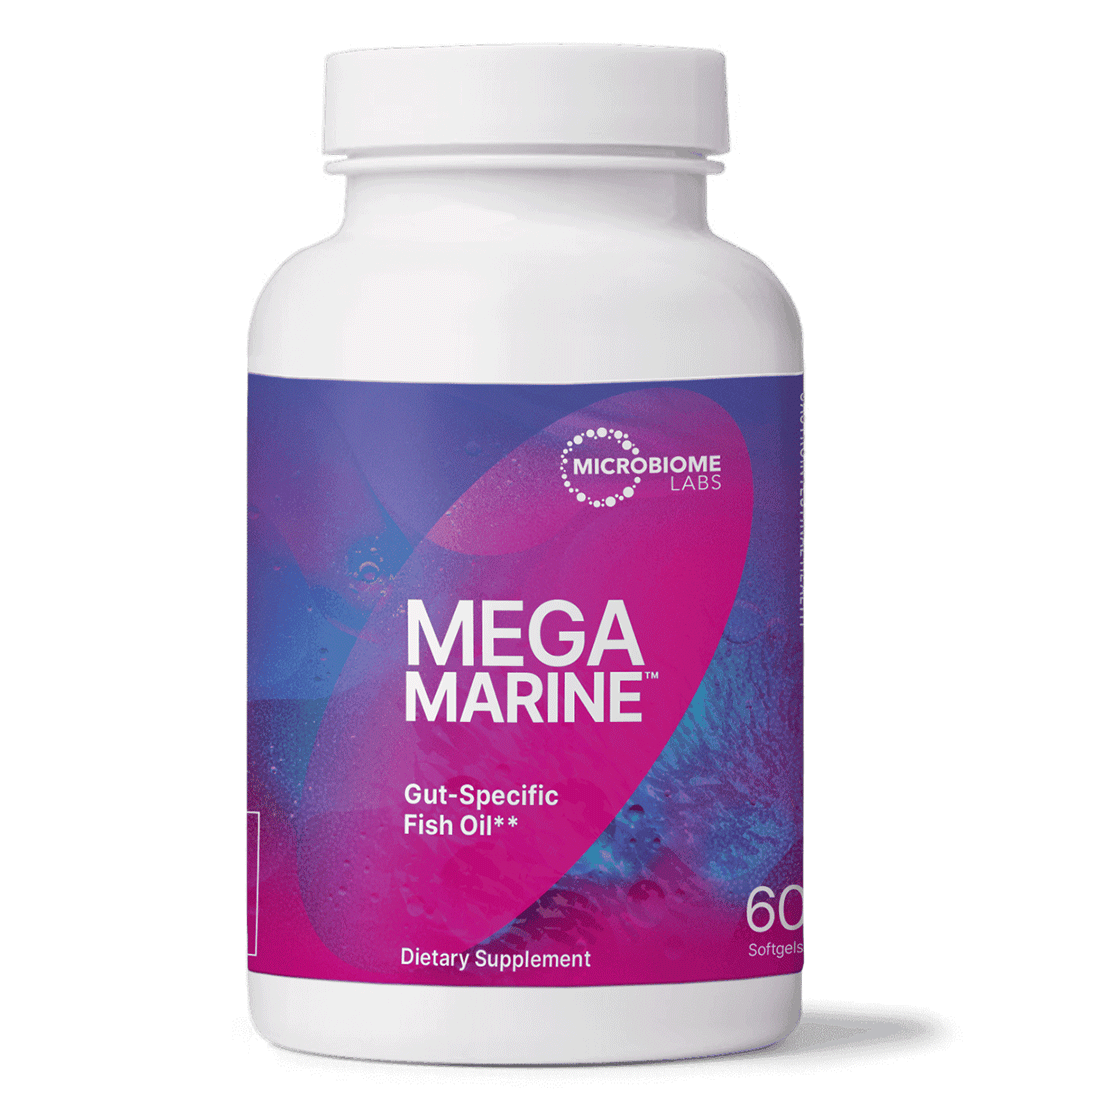 MegaMarine by Microbiome Labs New Bottle Front